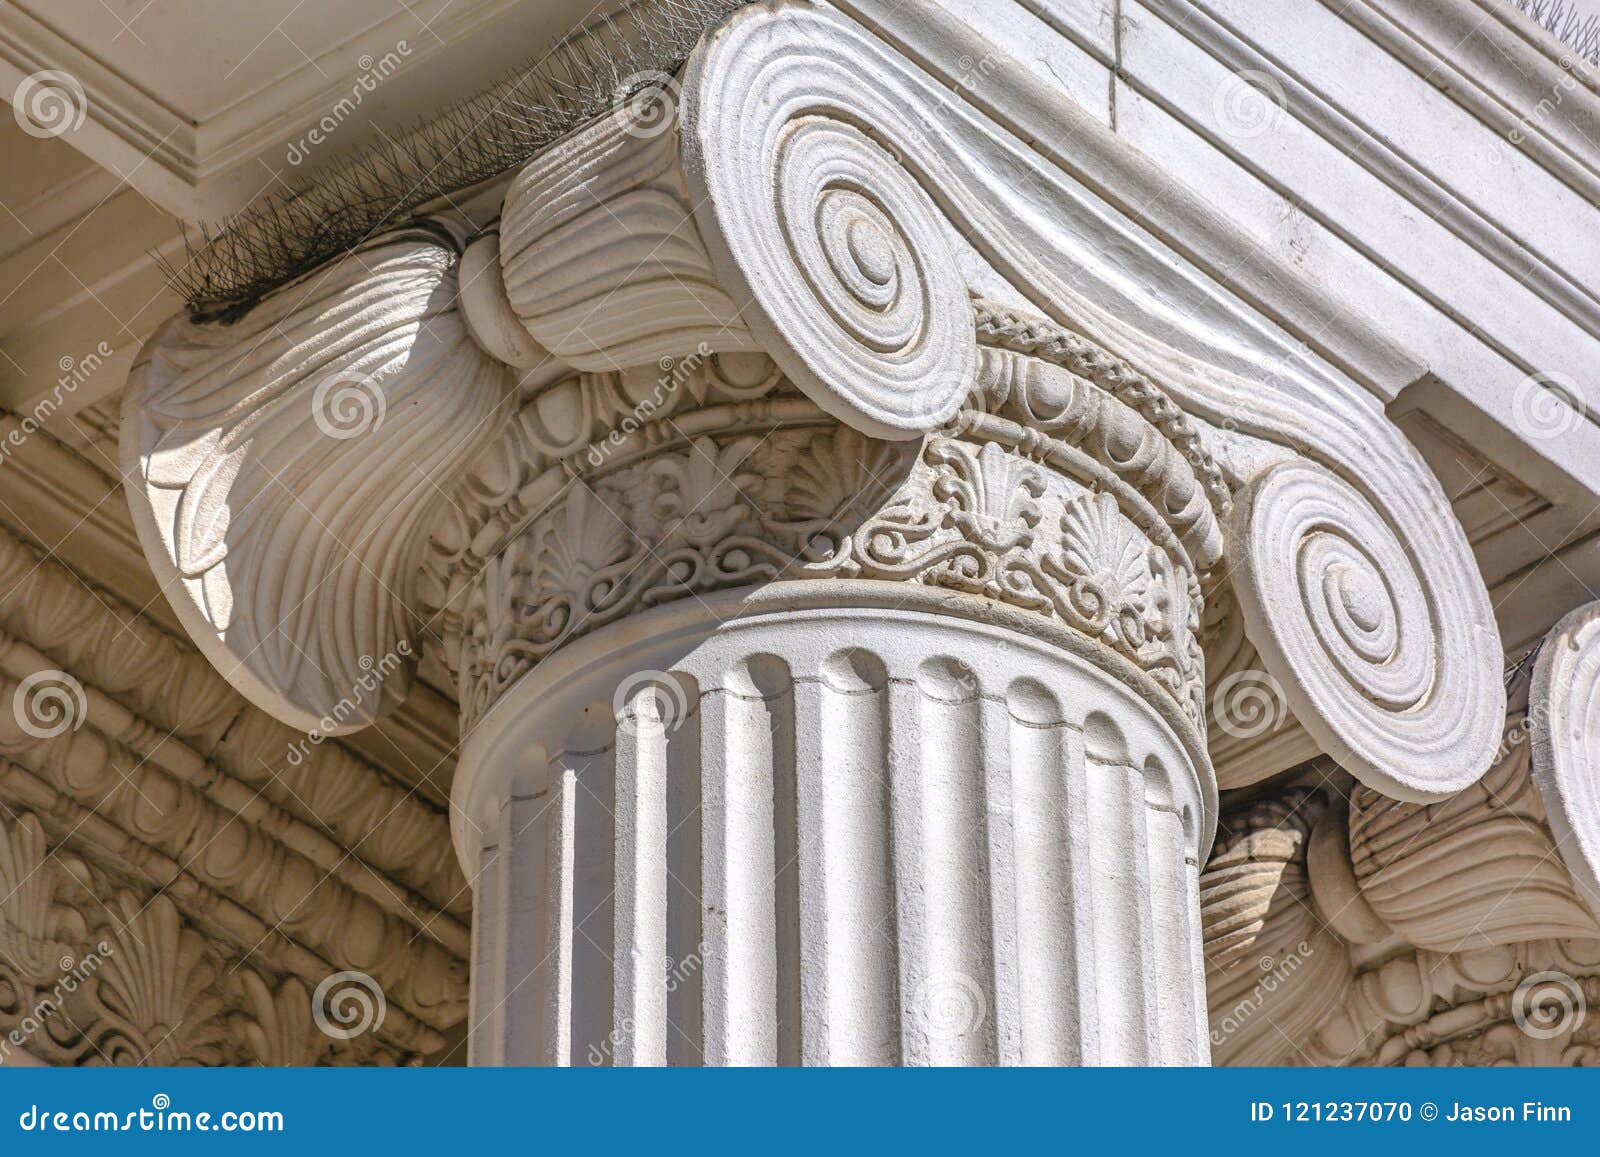 details of architectural column of government